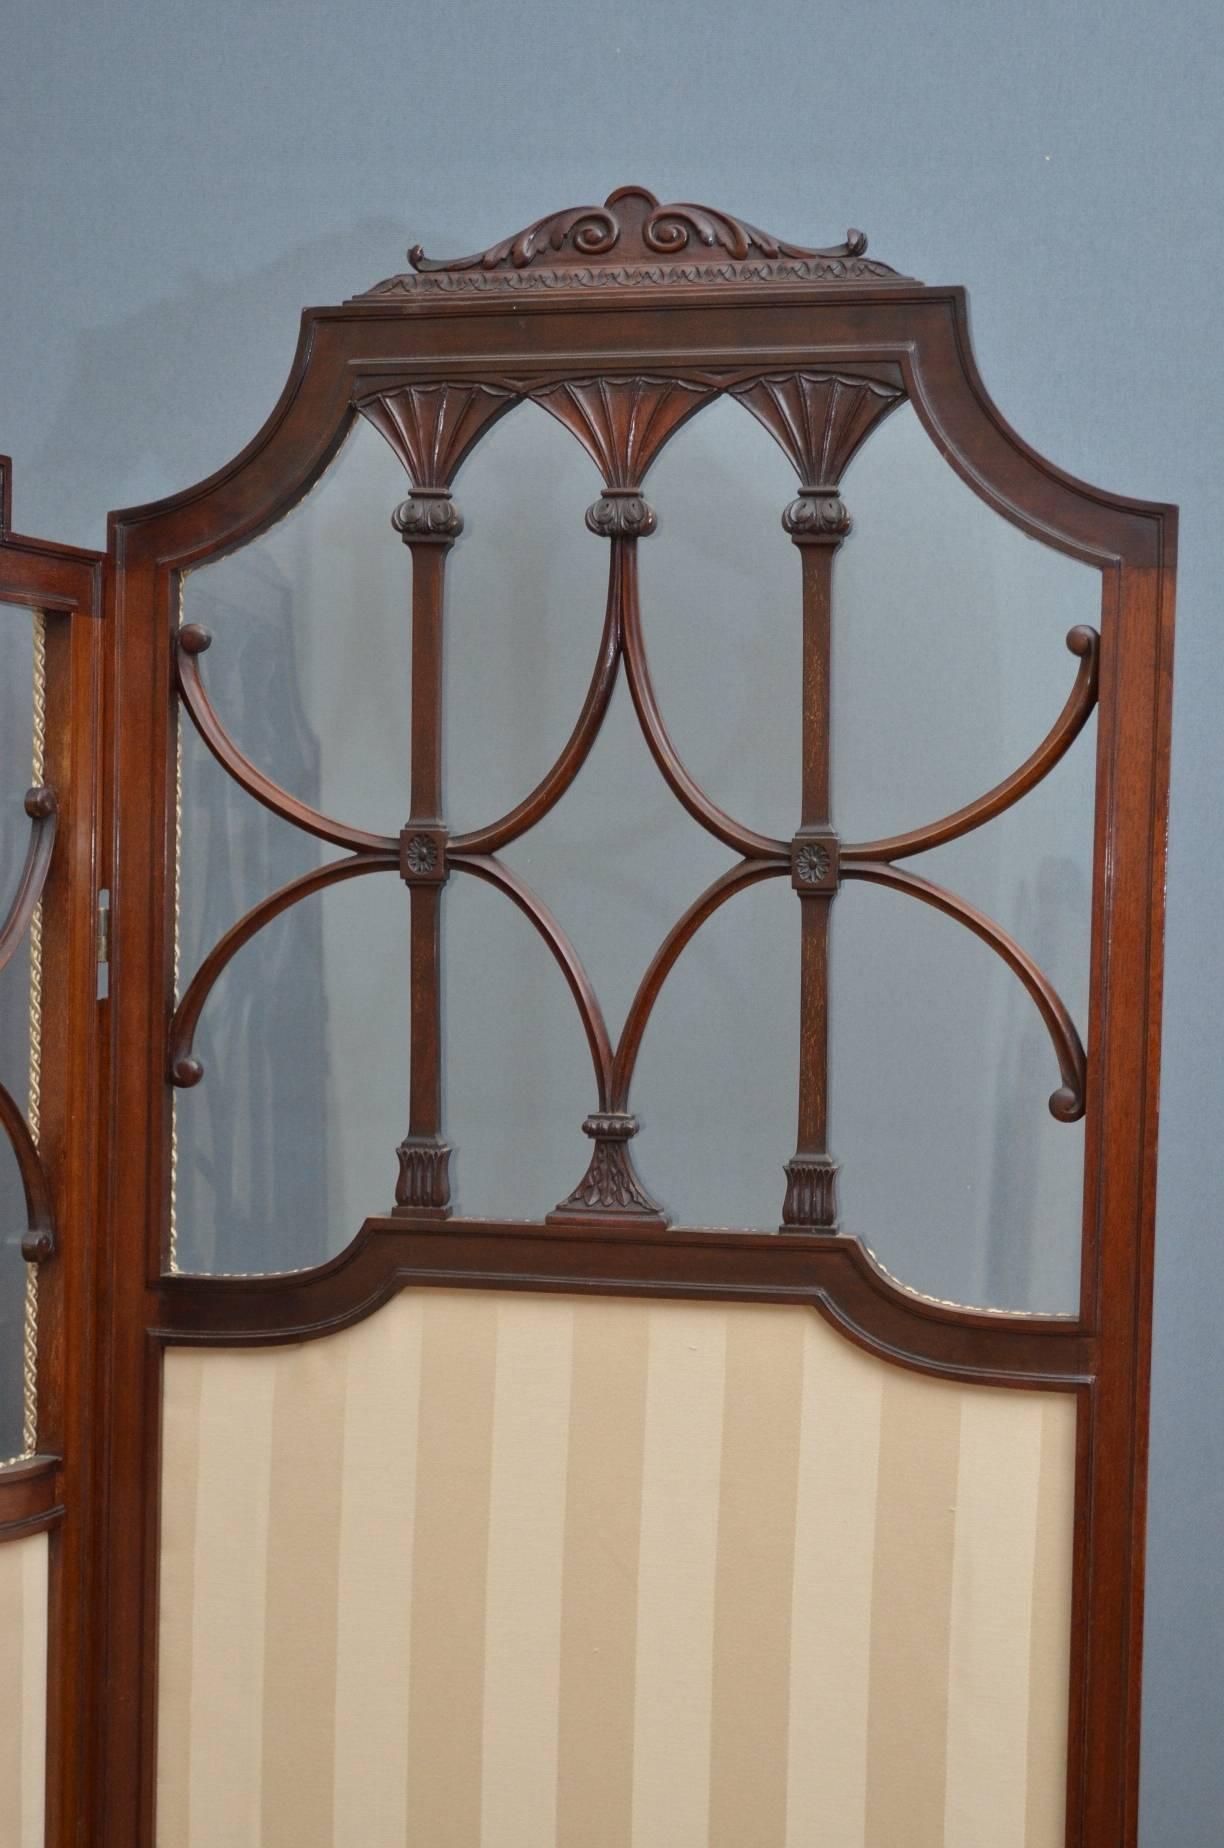 Sn3483, exceptional Edwardian, mahogany room divider, having three shaped glazed panels in finely carved frame and new clean fabric, standing on shaped feet. This is a very pretty and decorative piece in excellent condition throughout, ready to